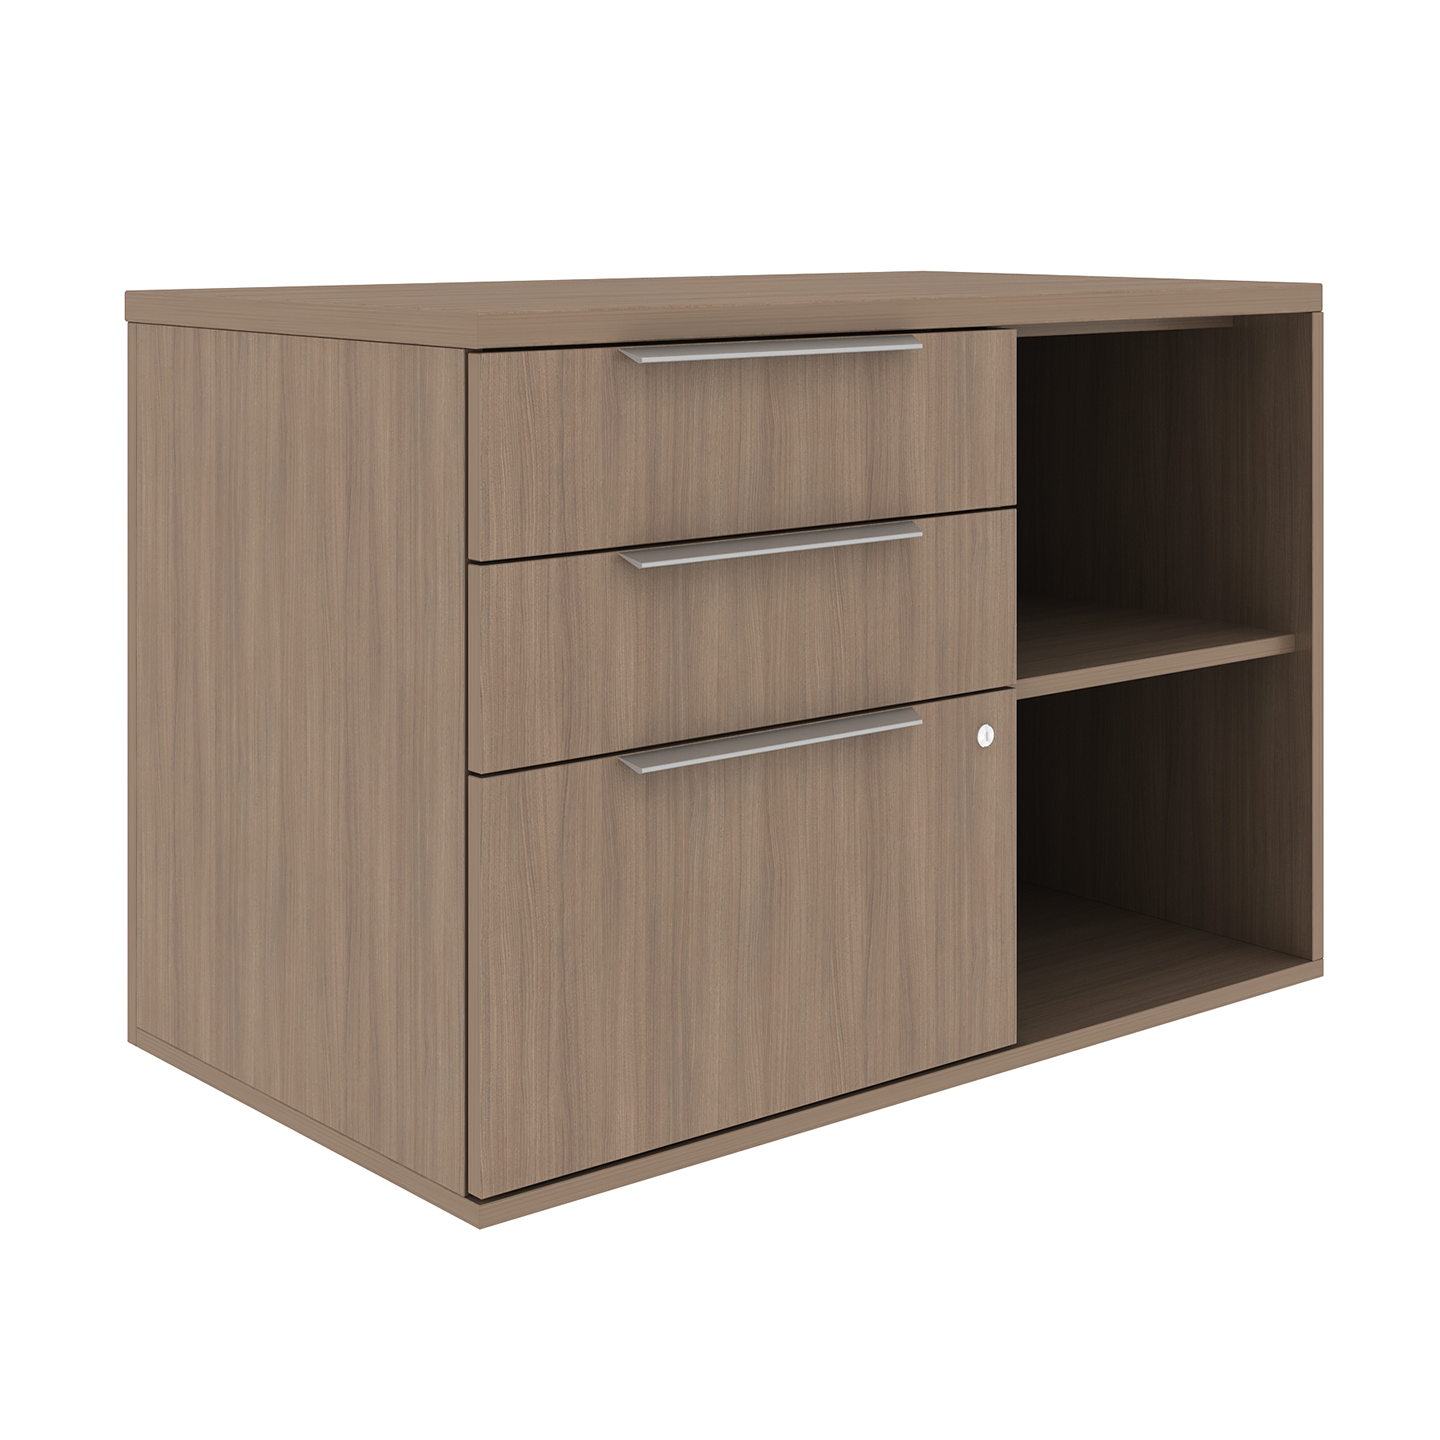 Credenza with drawers and open shelves in walnut woodgrain finish